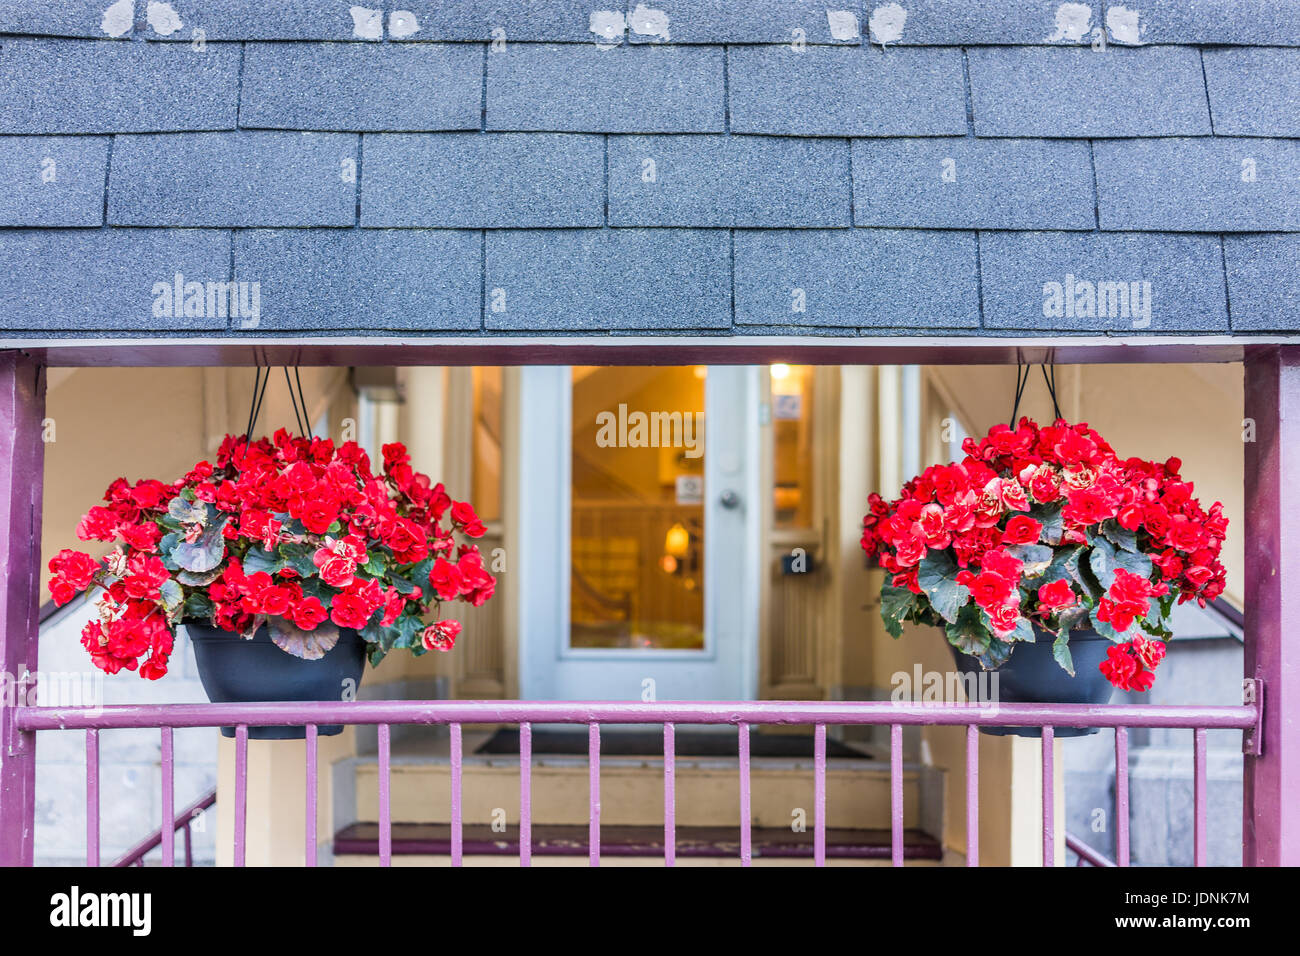 Red begonia flower pots by entrance of building during summer as decorations Stock Photo